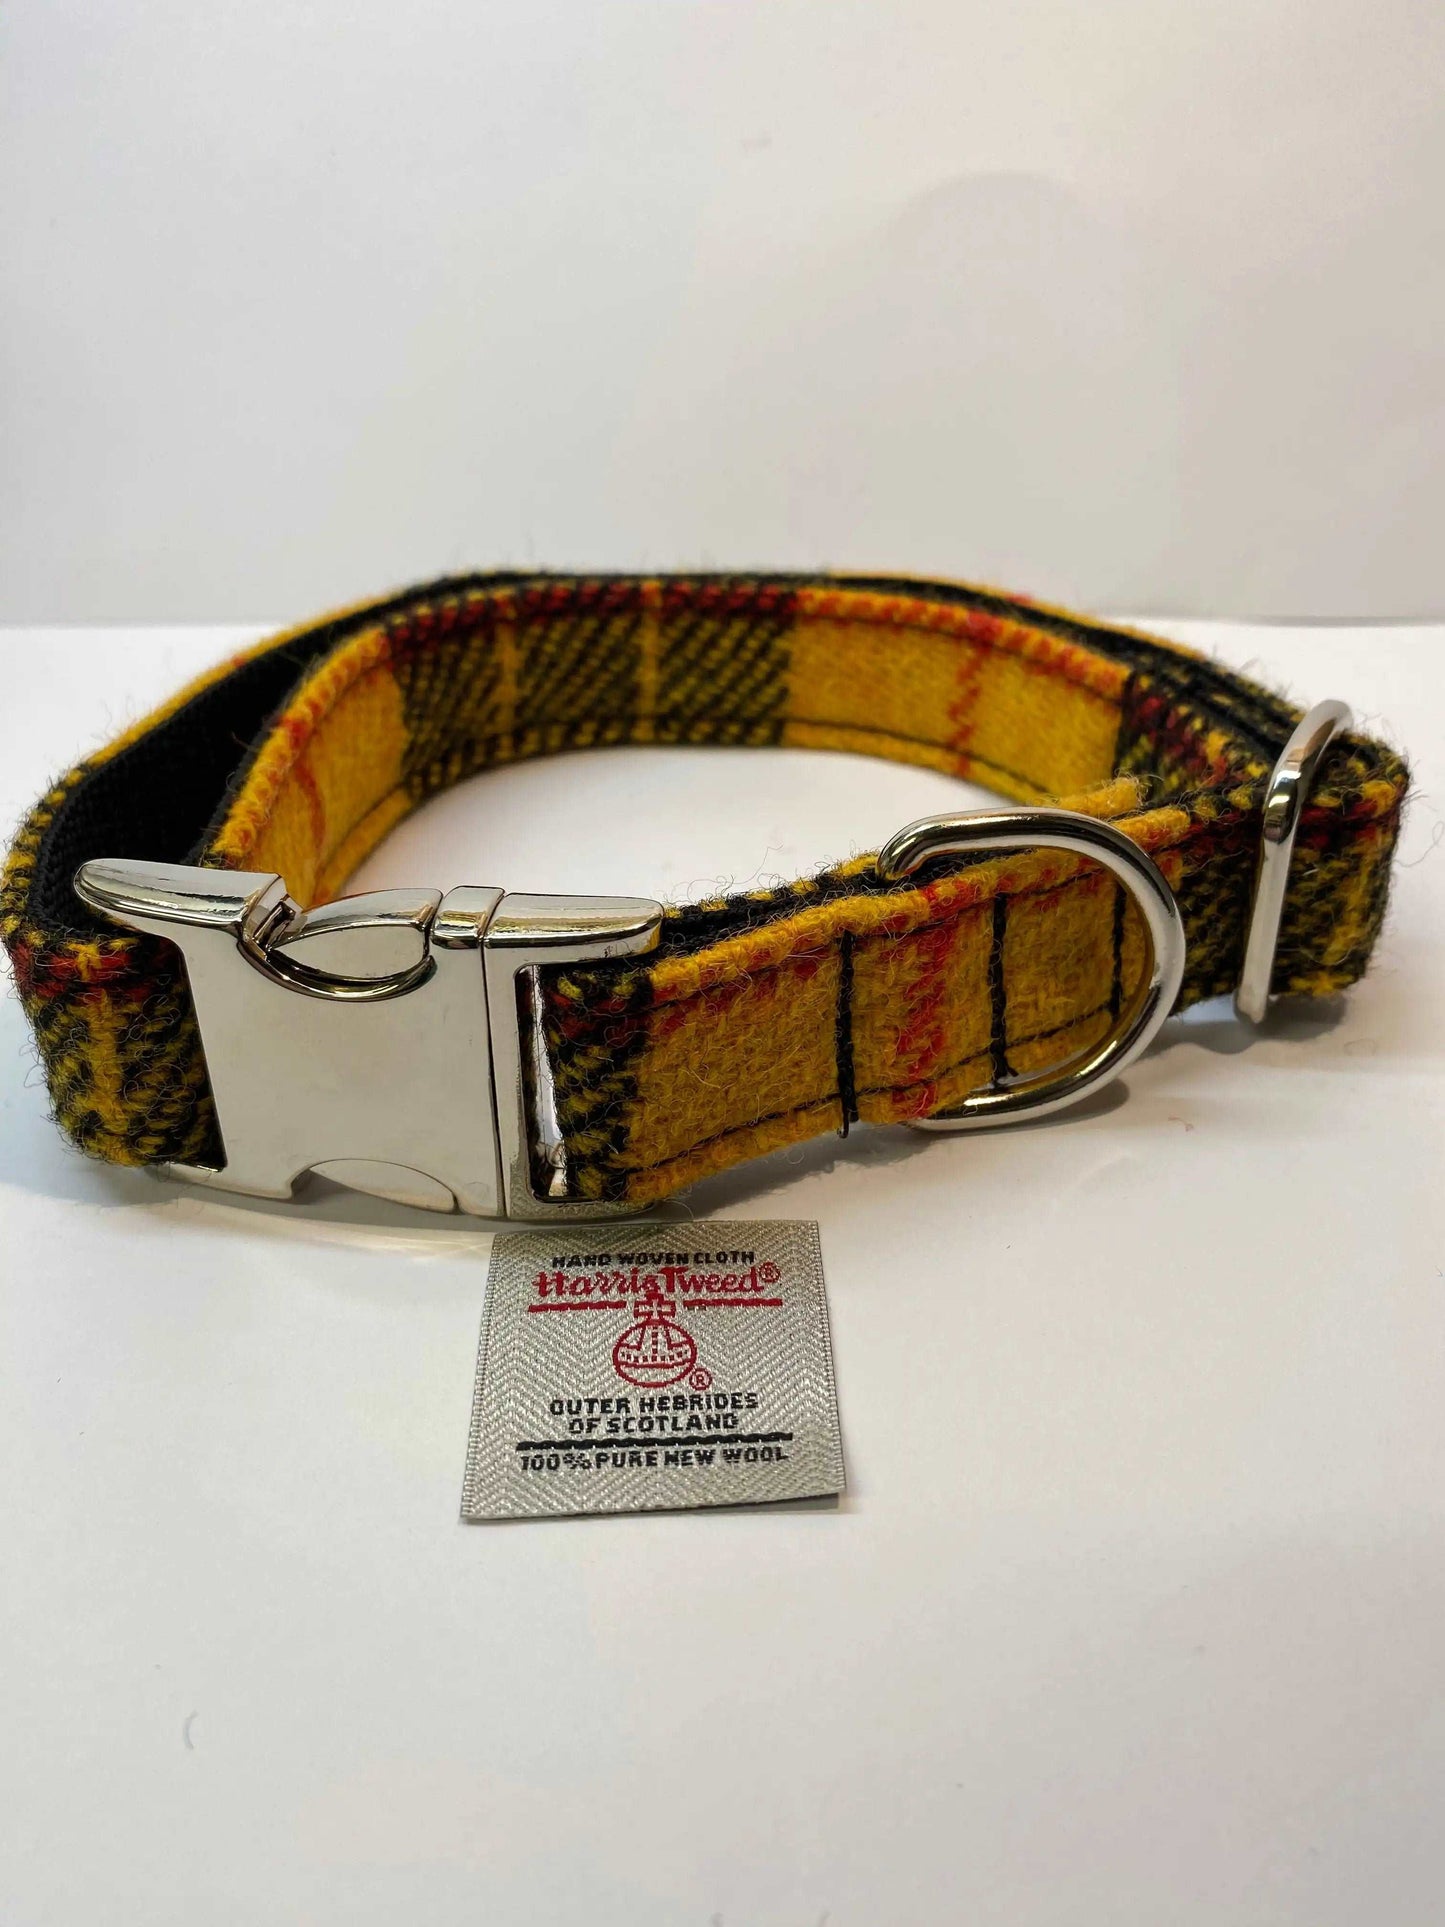 Harris Tweed Dog Collar Yellow ,Black and Red Check